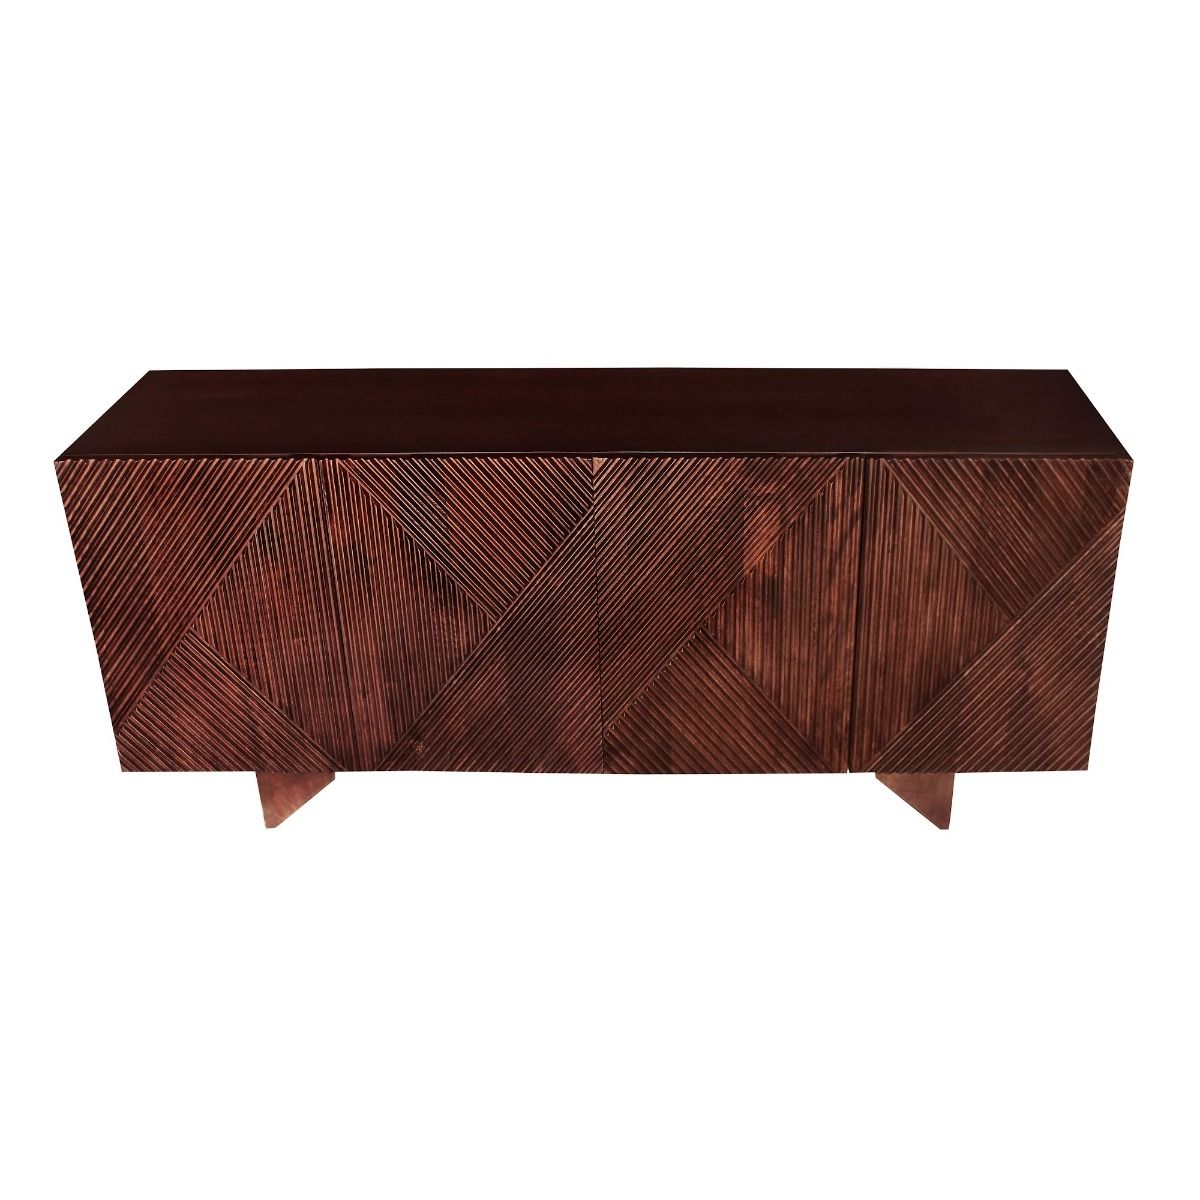 Rich Brown Sideboard - decorstore